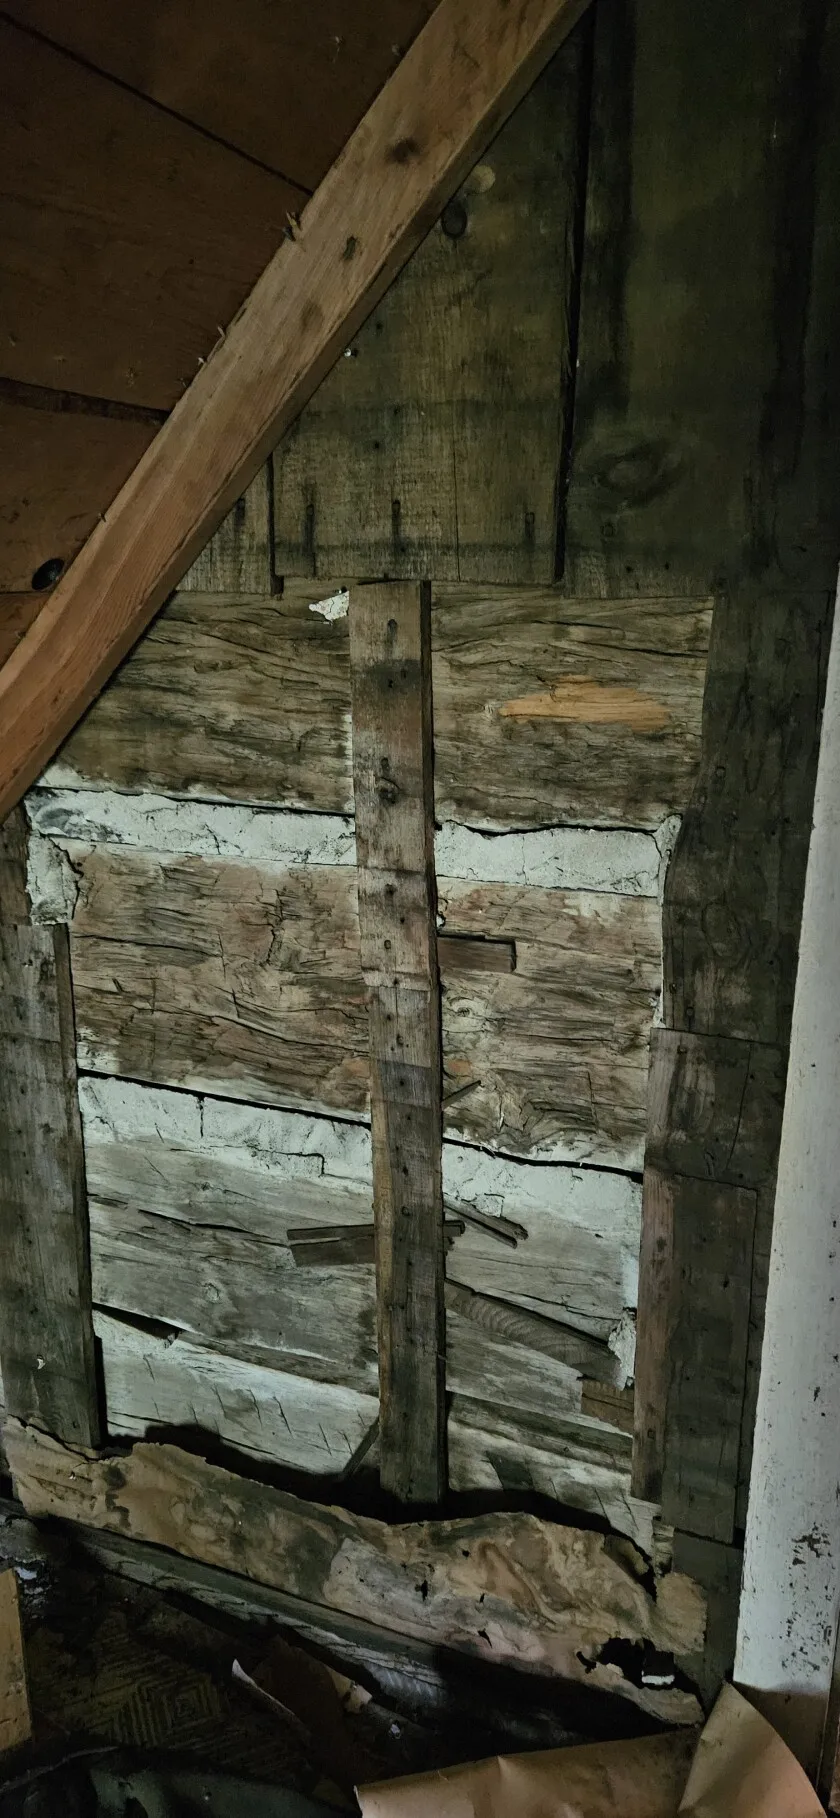 This interior view shows the upstairs logs in place in the cabin.